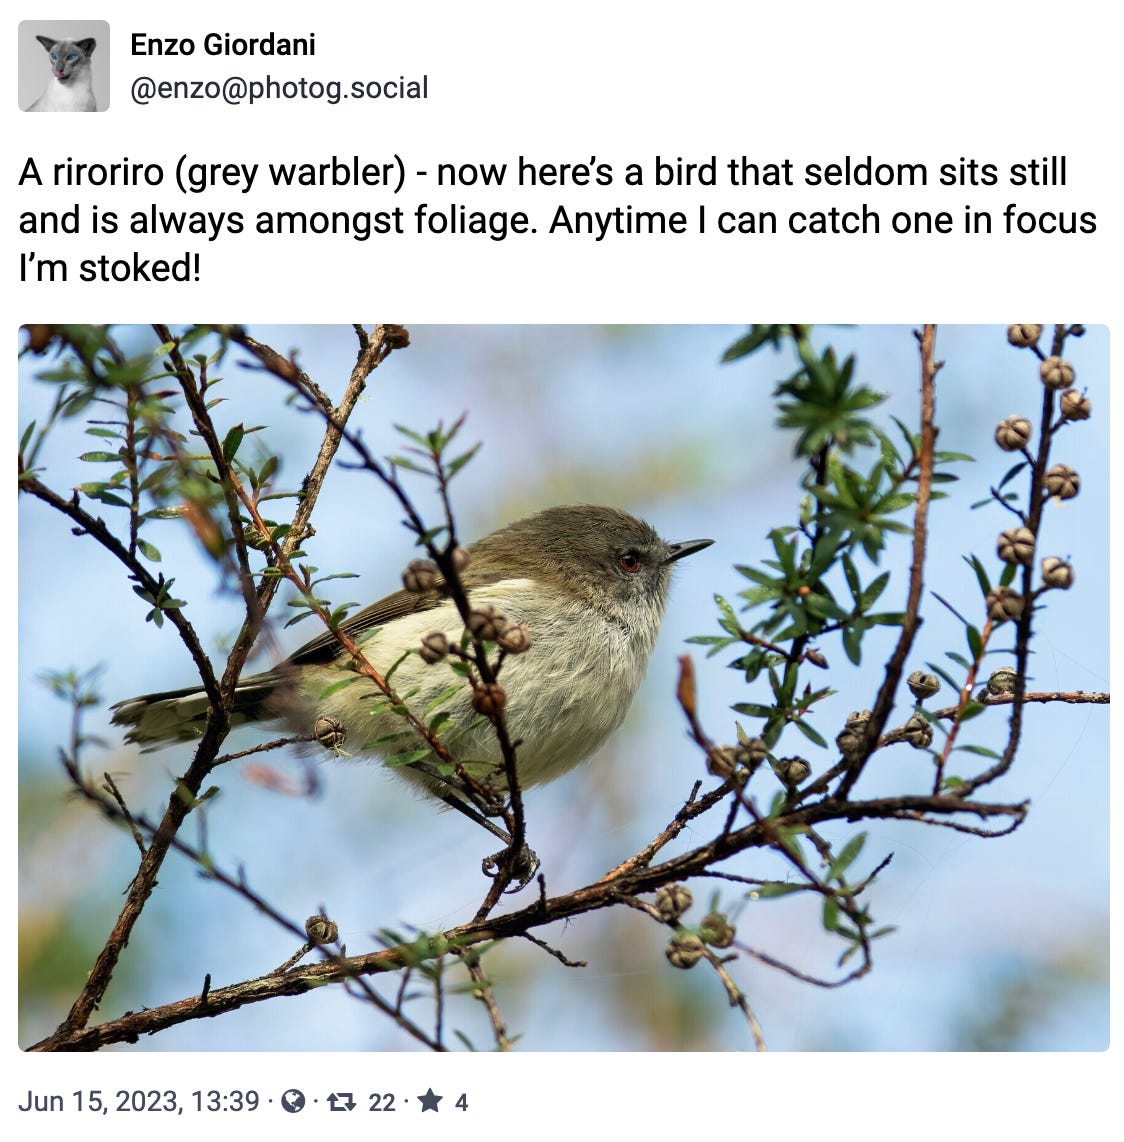 A riroriro (grey warbler) - now here’s a bird that seldom sits still and is always amongst foliage. Anytime I can catch one in focus I’m stoked!